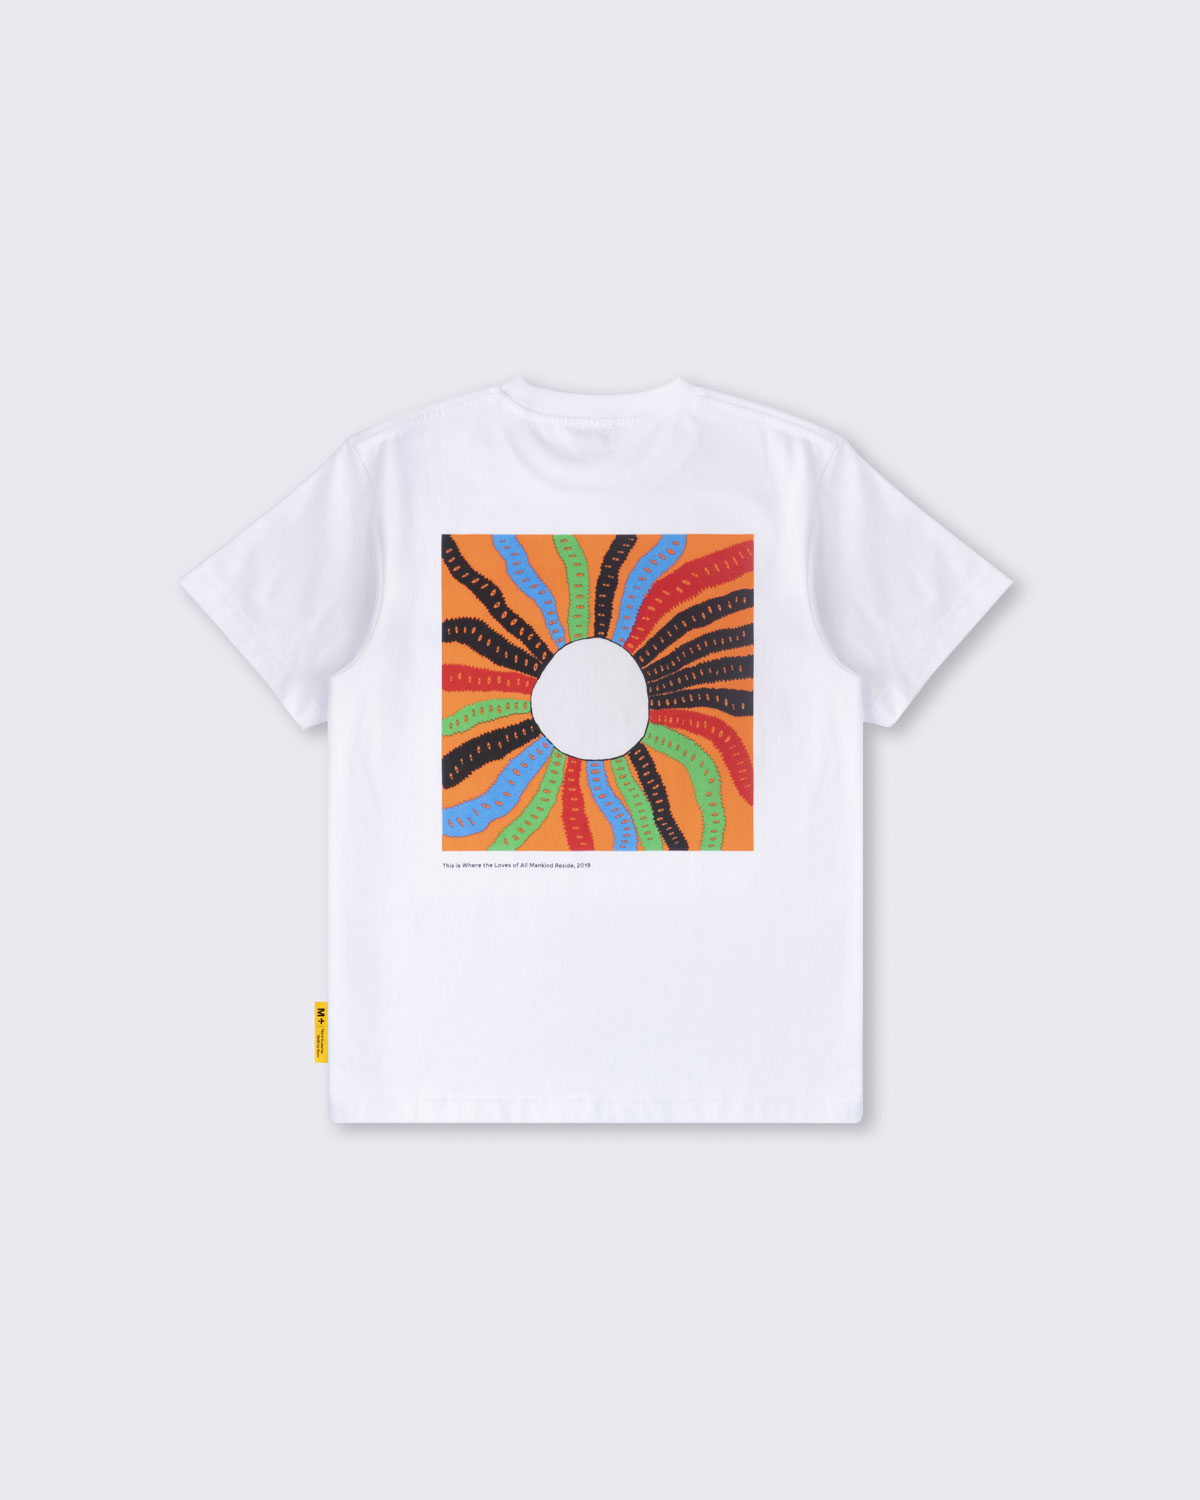 Yayoi Kusama 'This Is Where the Loves of All Mankind Reside' T-Shirt